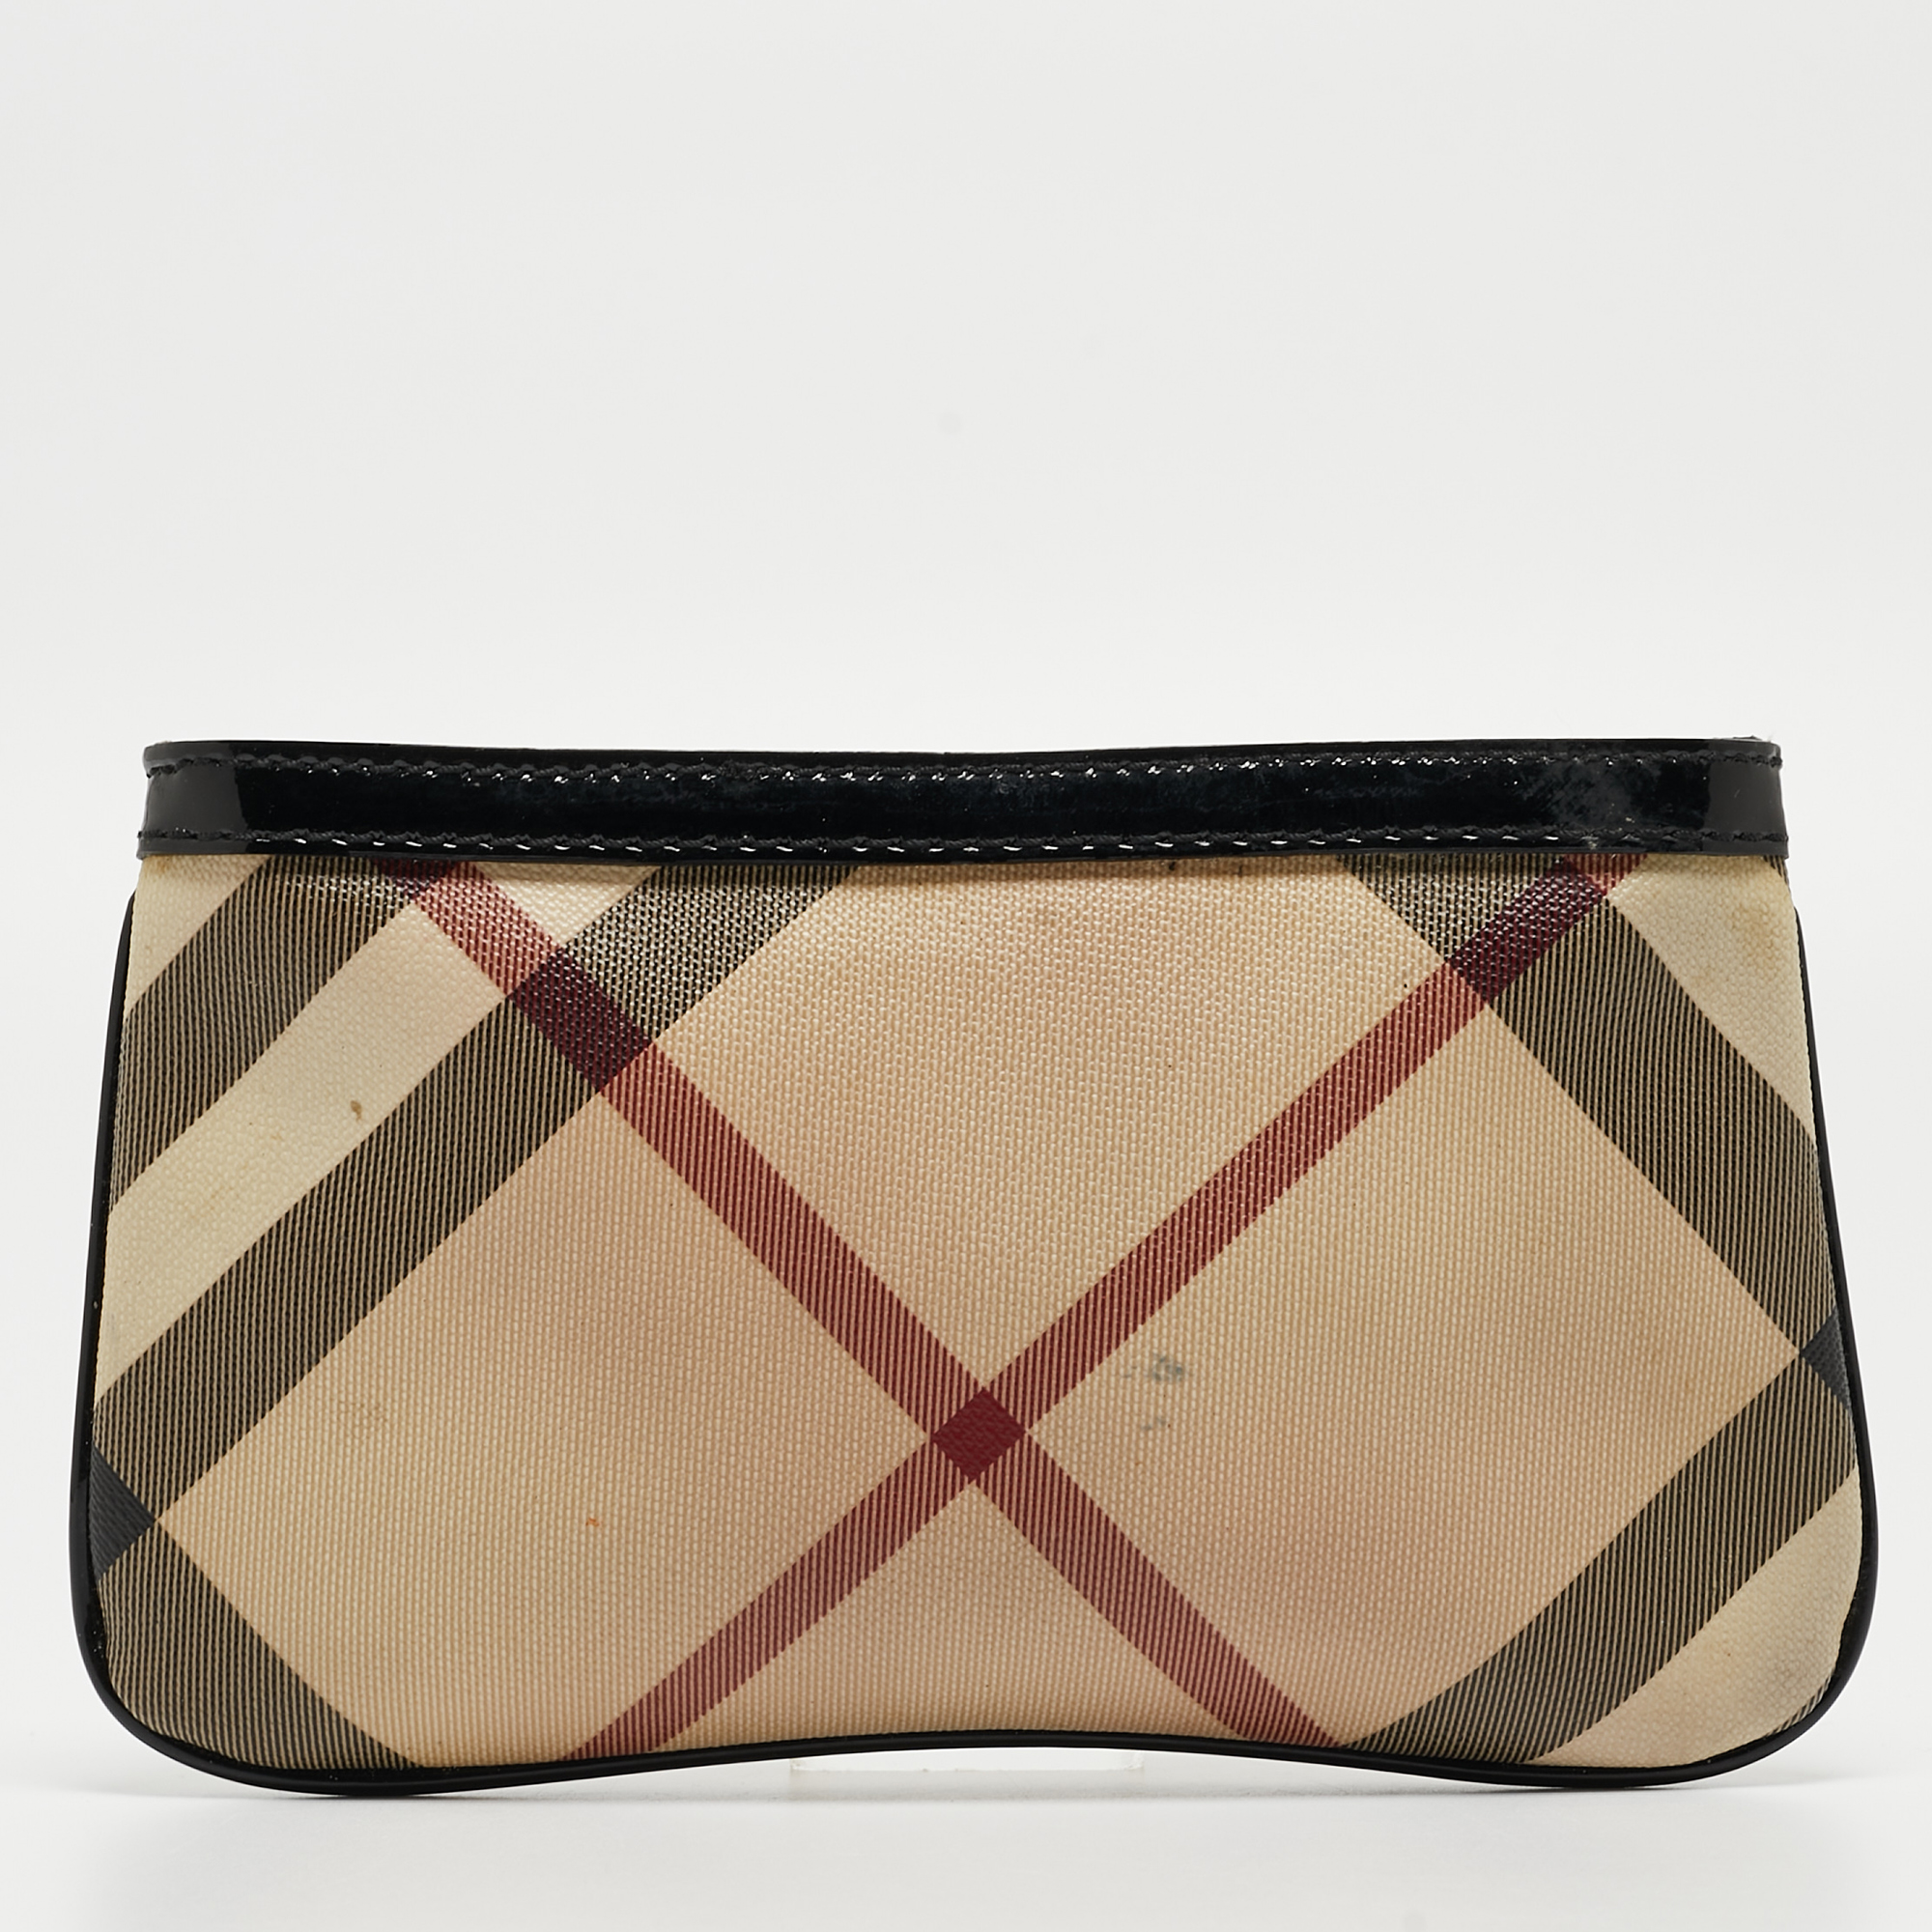 Burberry Beige/Black Nova Check Coated Canvas And Patent Leather Zip Wristlet Clutch